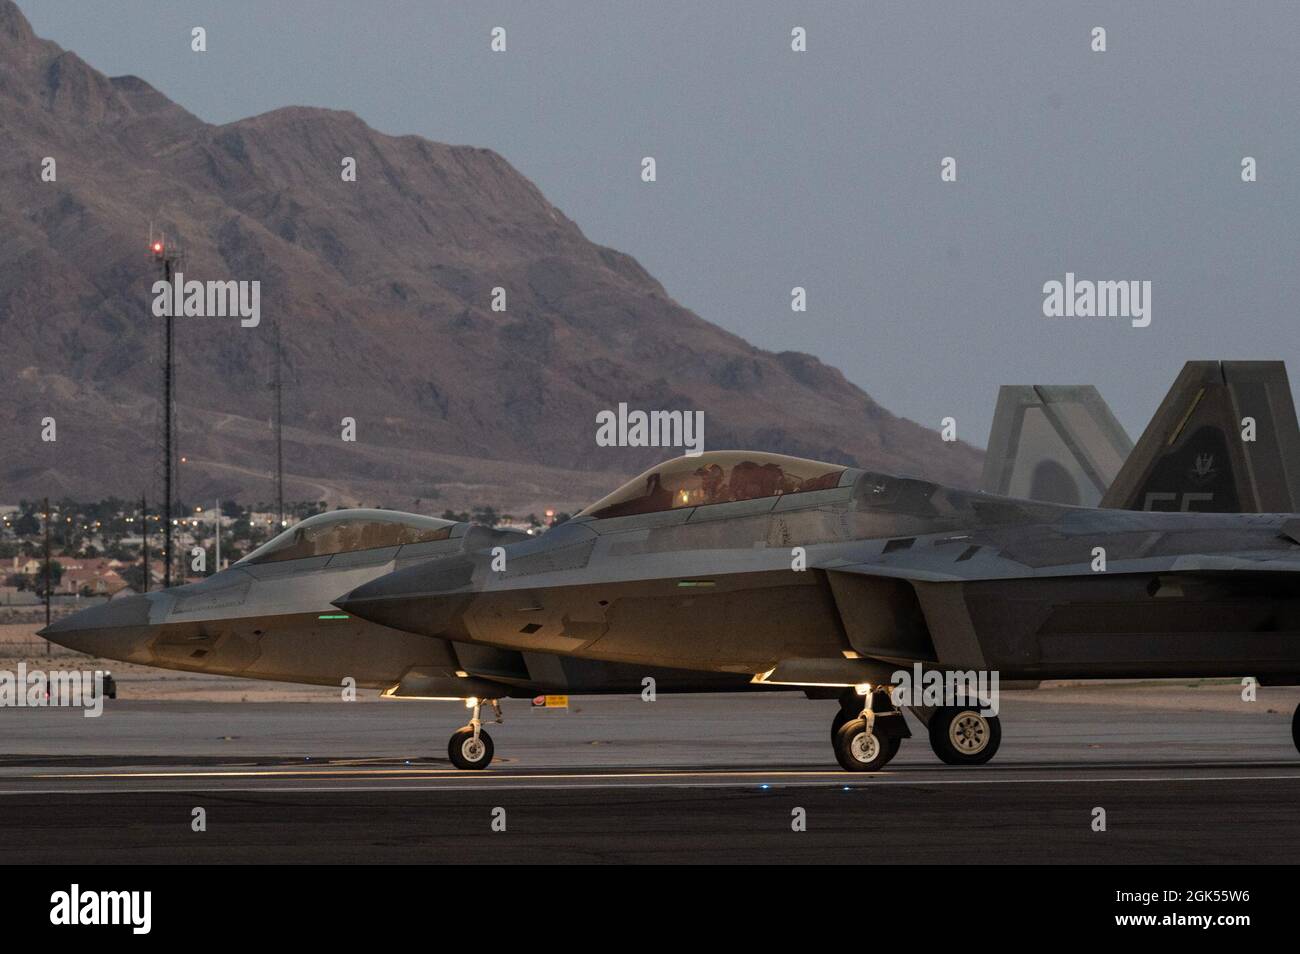 Two F-22 Raptors assigned to the 1st Fighter Wing, Langley Air Force Base, Virginia, line up prior to take-off for a night-training mission during Red Flag-Nellis 21-3 at Nellis Air Force Base, Nevada, Aug. 4, 2021. The 1st FW hosted RF-Nellis 21-3 as the lead wing with nearly 100 aircraft, such as the F-35, F-35, F-22, F-16CJ, F-16C, EC-130H, EA-18G, B-52, B-2, F/A-18 C/D, MQ-9, E-3, E-8, RC-135, RQ-4B30, RQ-4B40, U-2, HH-60, HC-130, KC-135 and KC-46, that participated in complex-mission scenarios against aggressor forces. Stock Photo